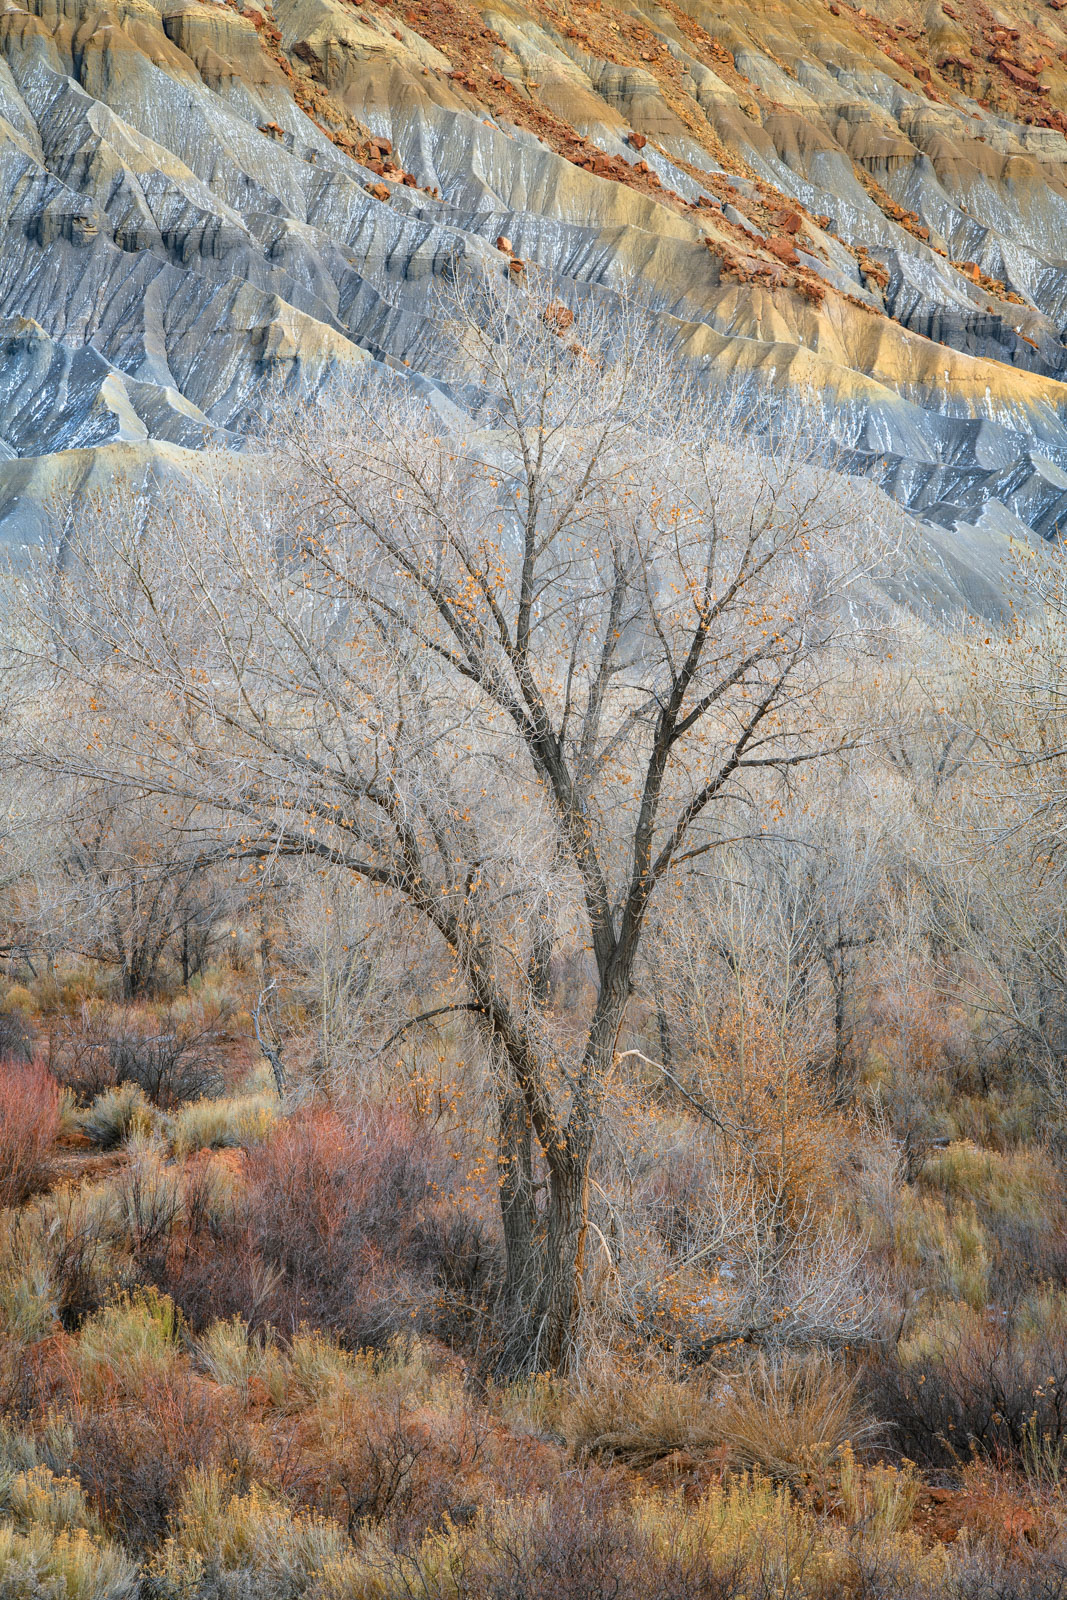 Cottonwoods, sage and rabbit brush along the Fremont River just outside of Capitol Reef National Park.